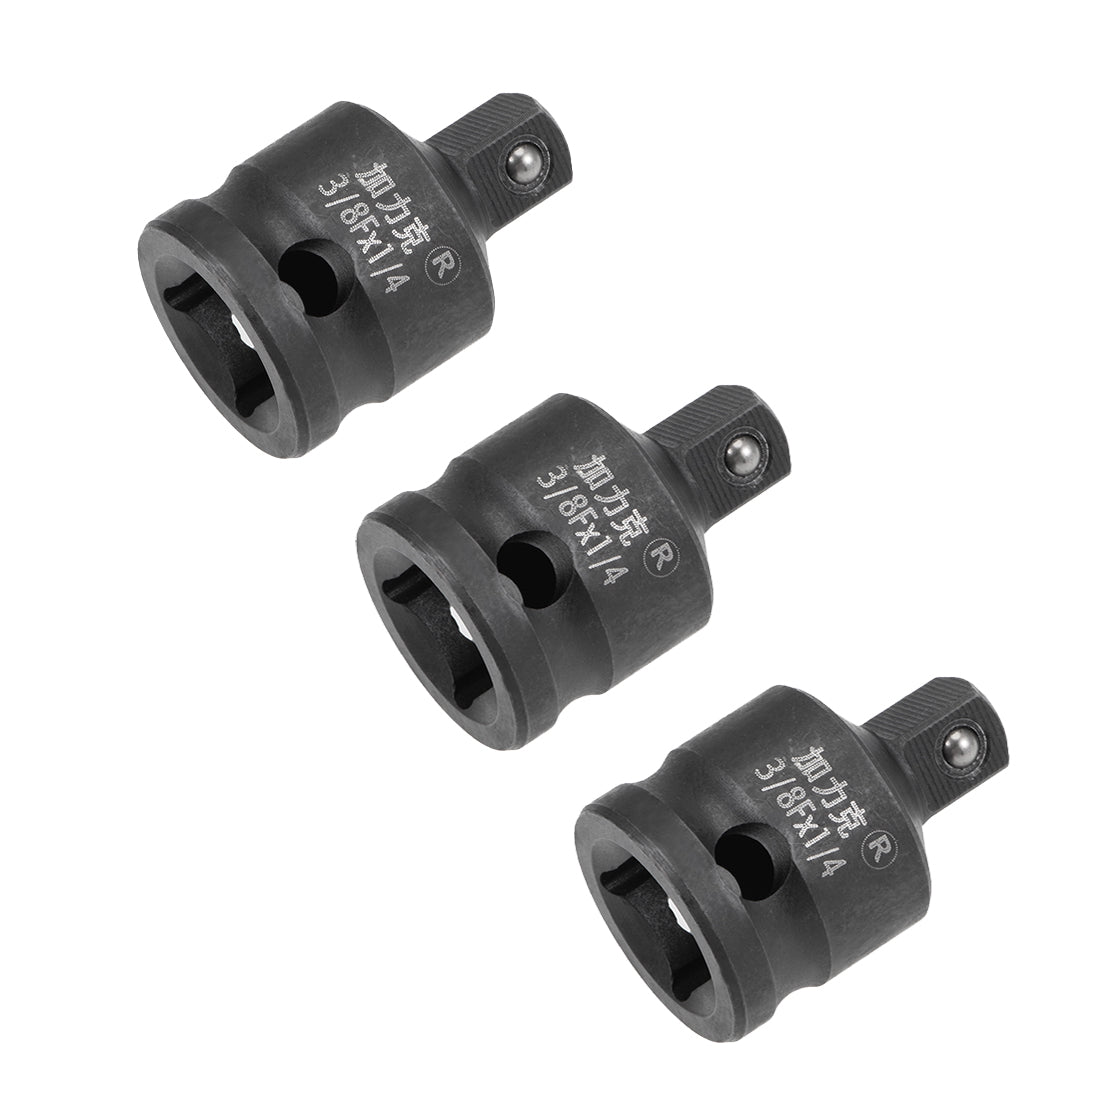 uxcell Uxcell 3 Pcs 3/8 Inch Drive (F) x 1/4 Inch (M) Impact Socket Reducer for Ratchet Wrenches, Female to Male, Cr-Mo